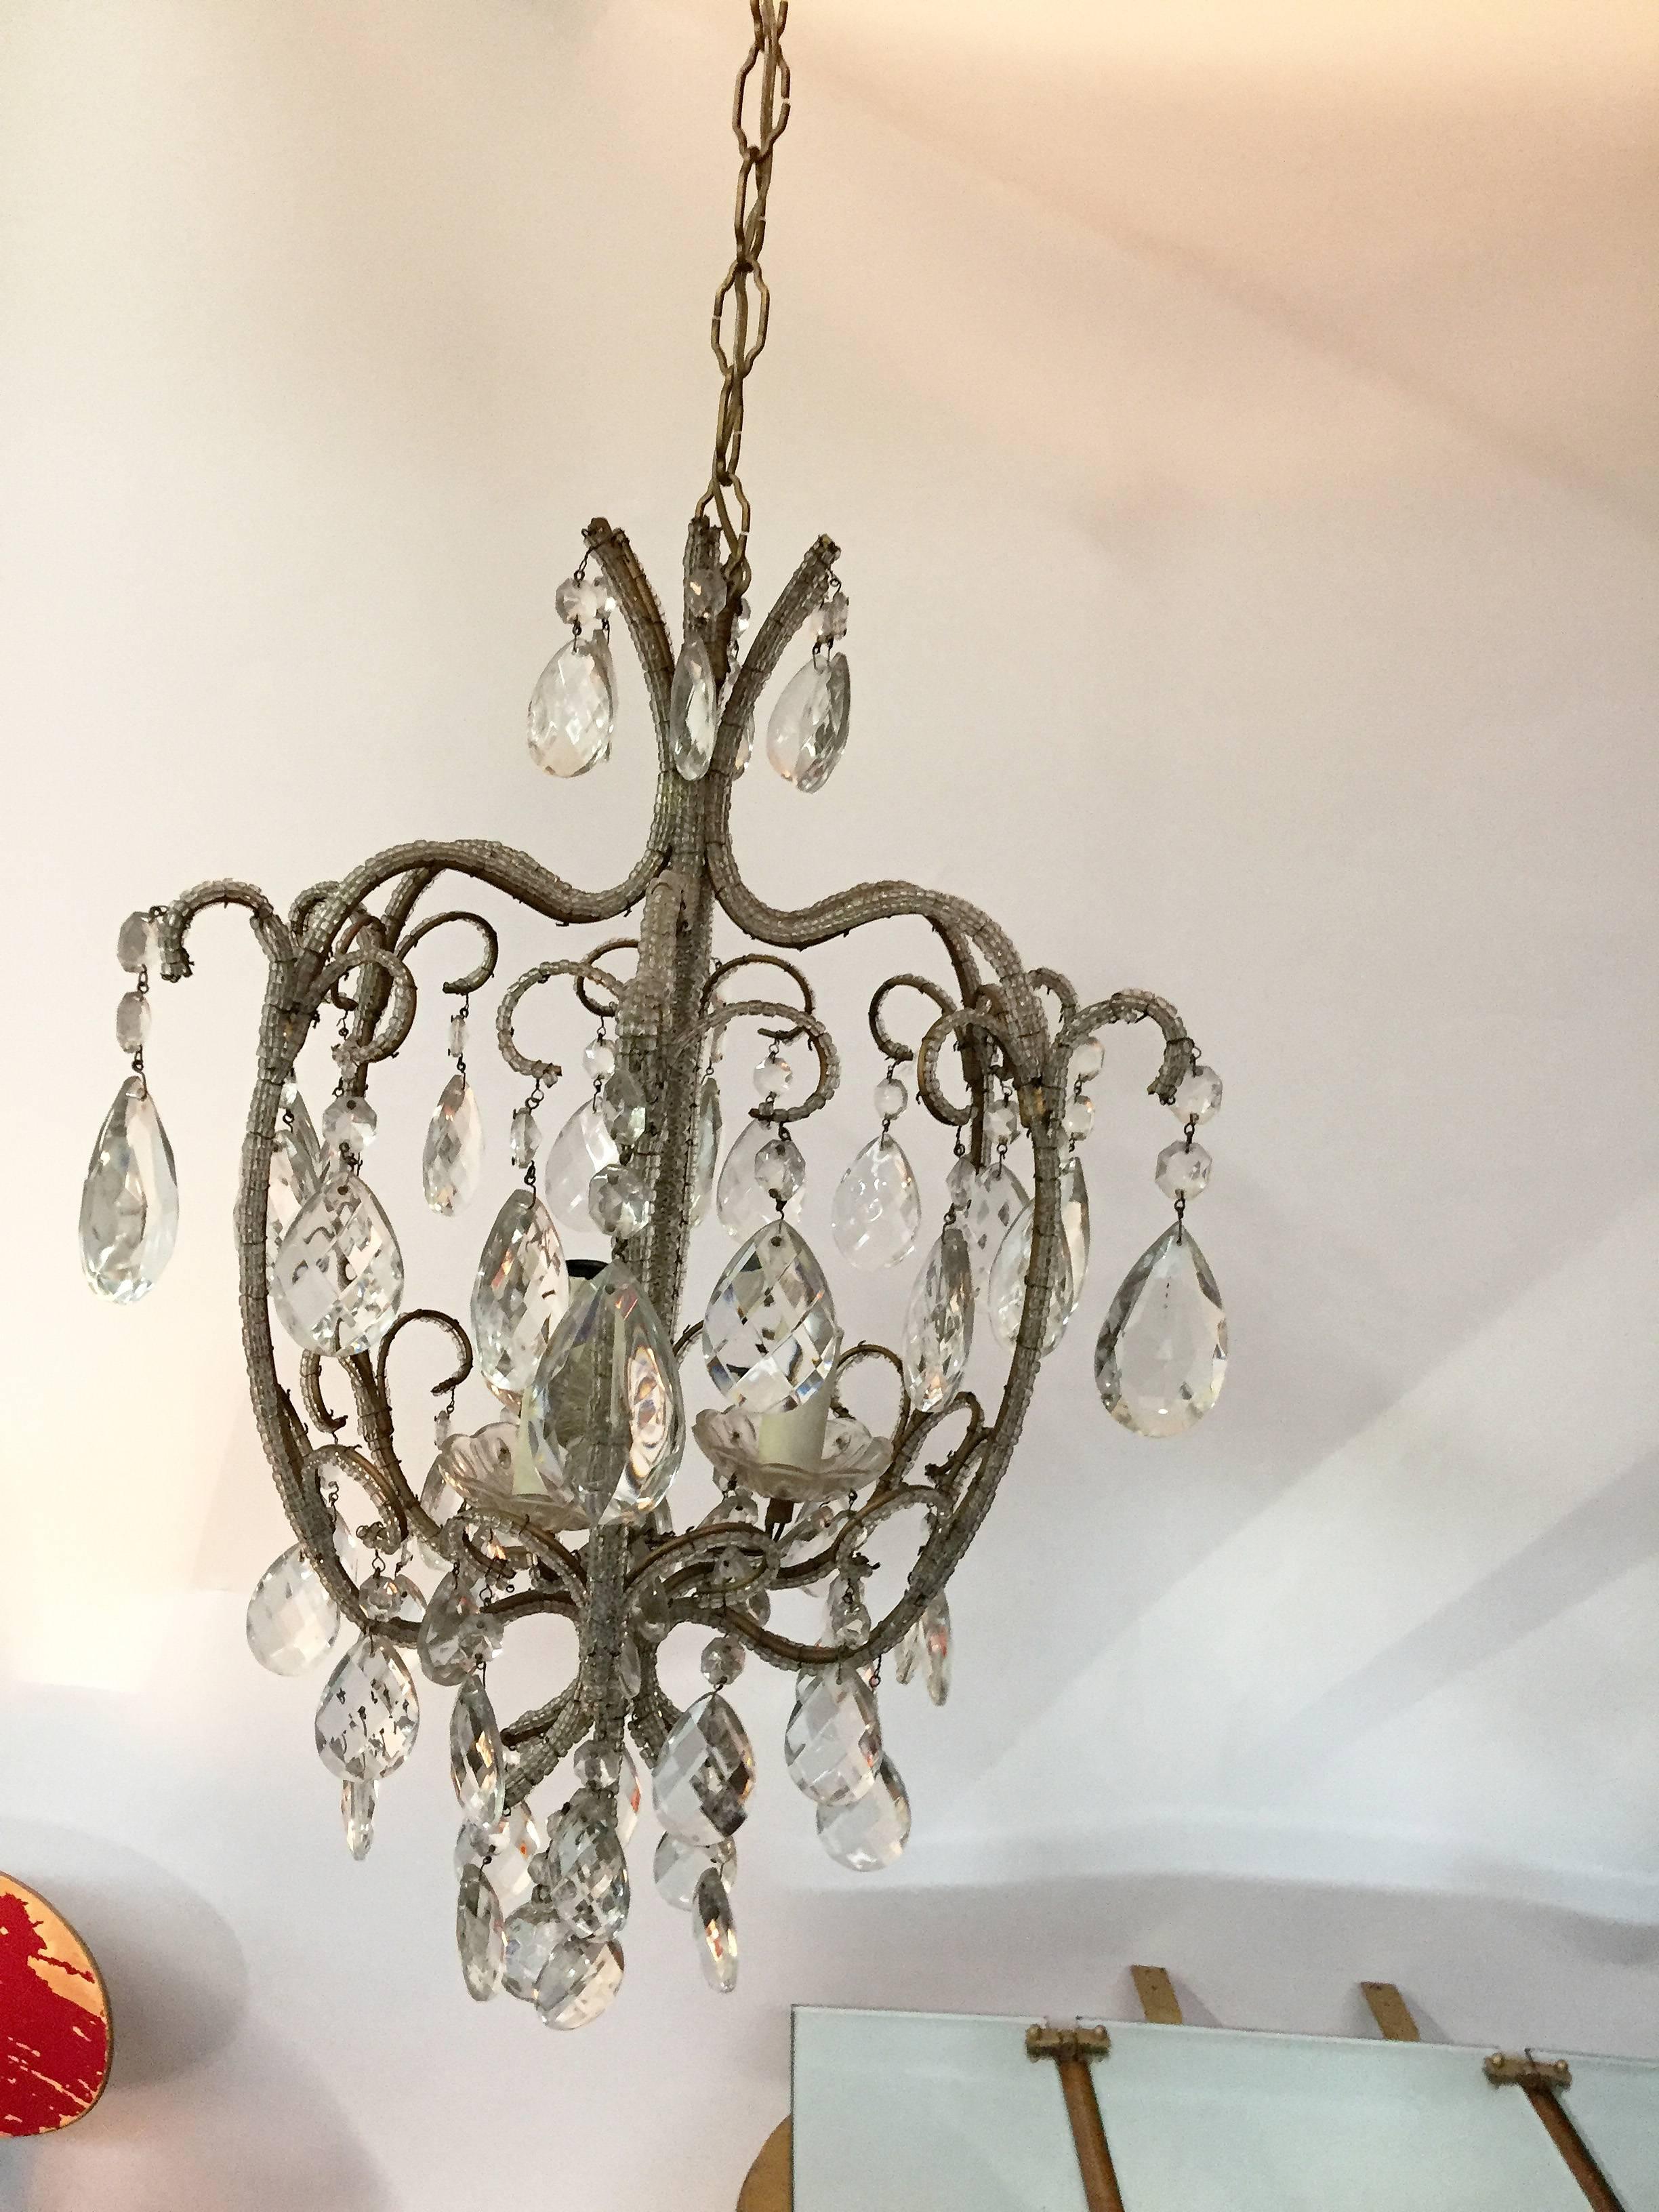 Lovely crystal chandelier in the style of Maison Baguès, circa 1960.